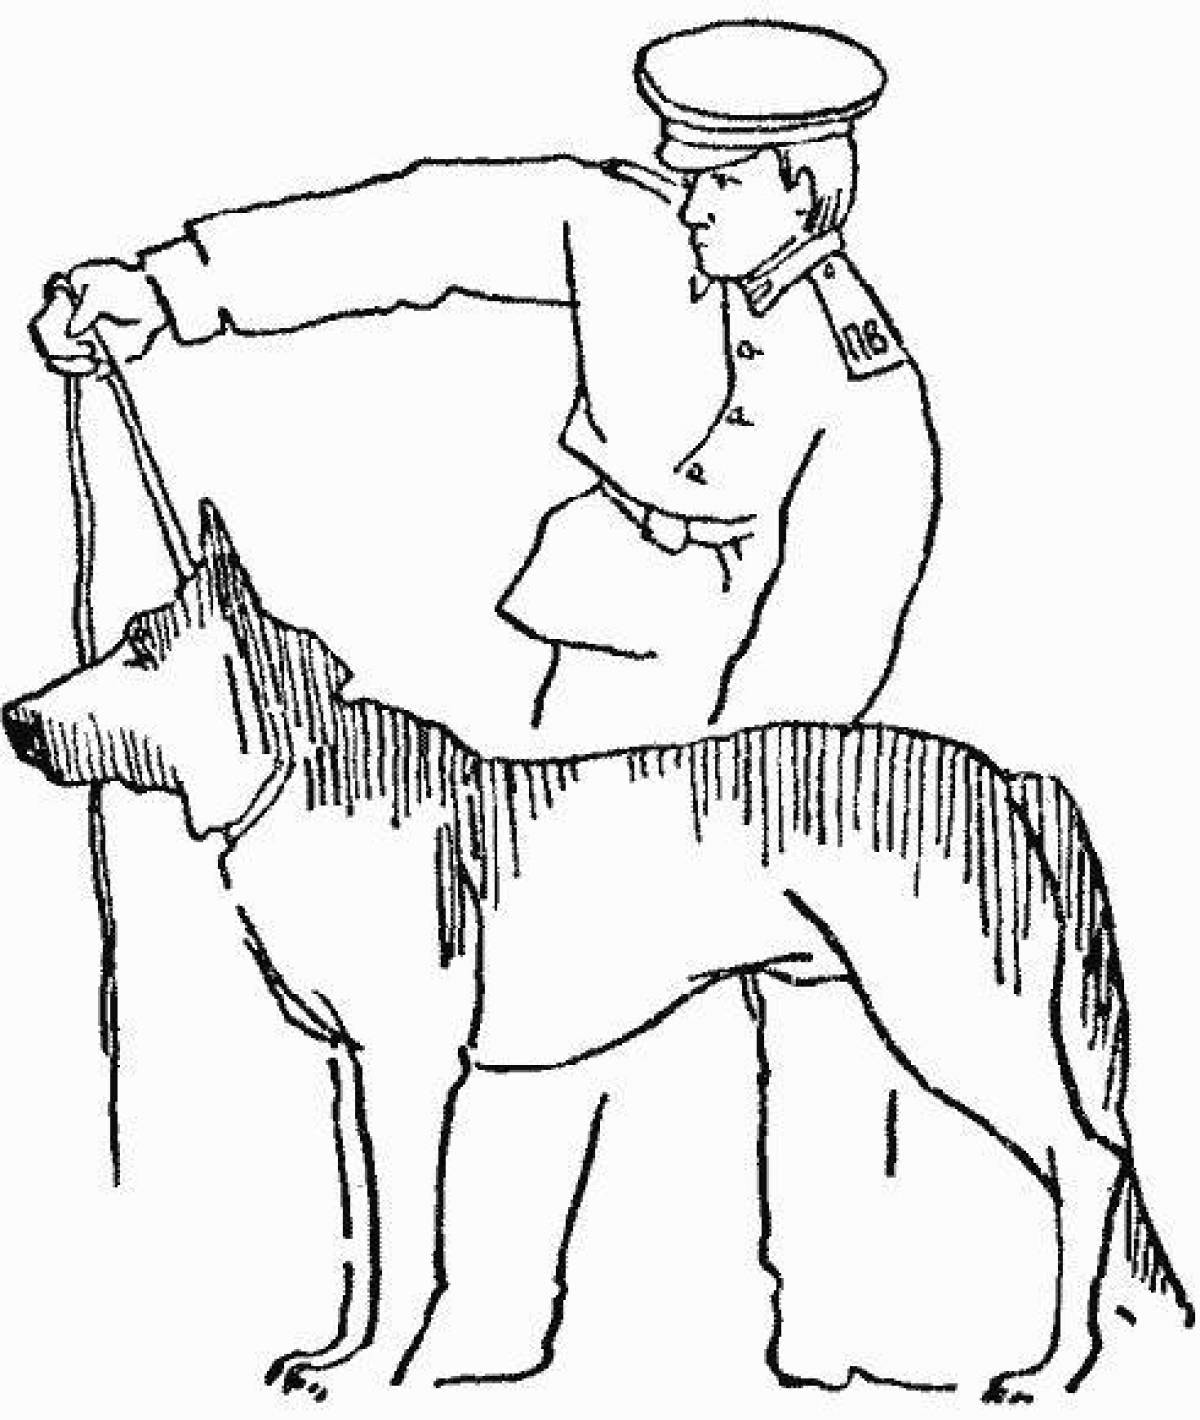 Coloring page energetic border guard